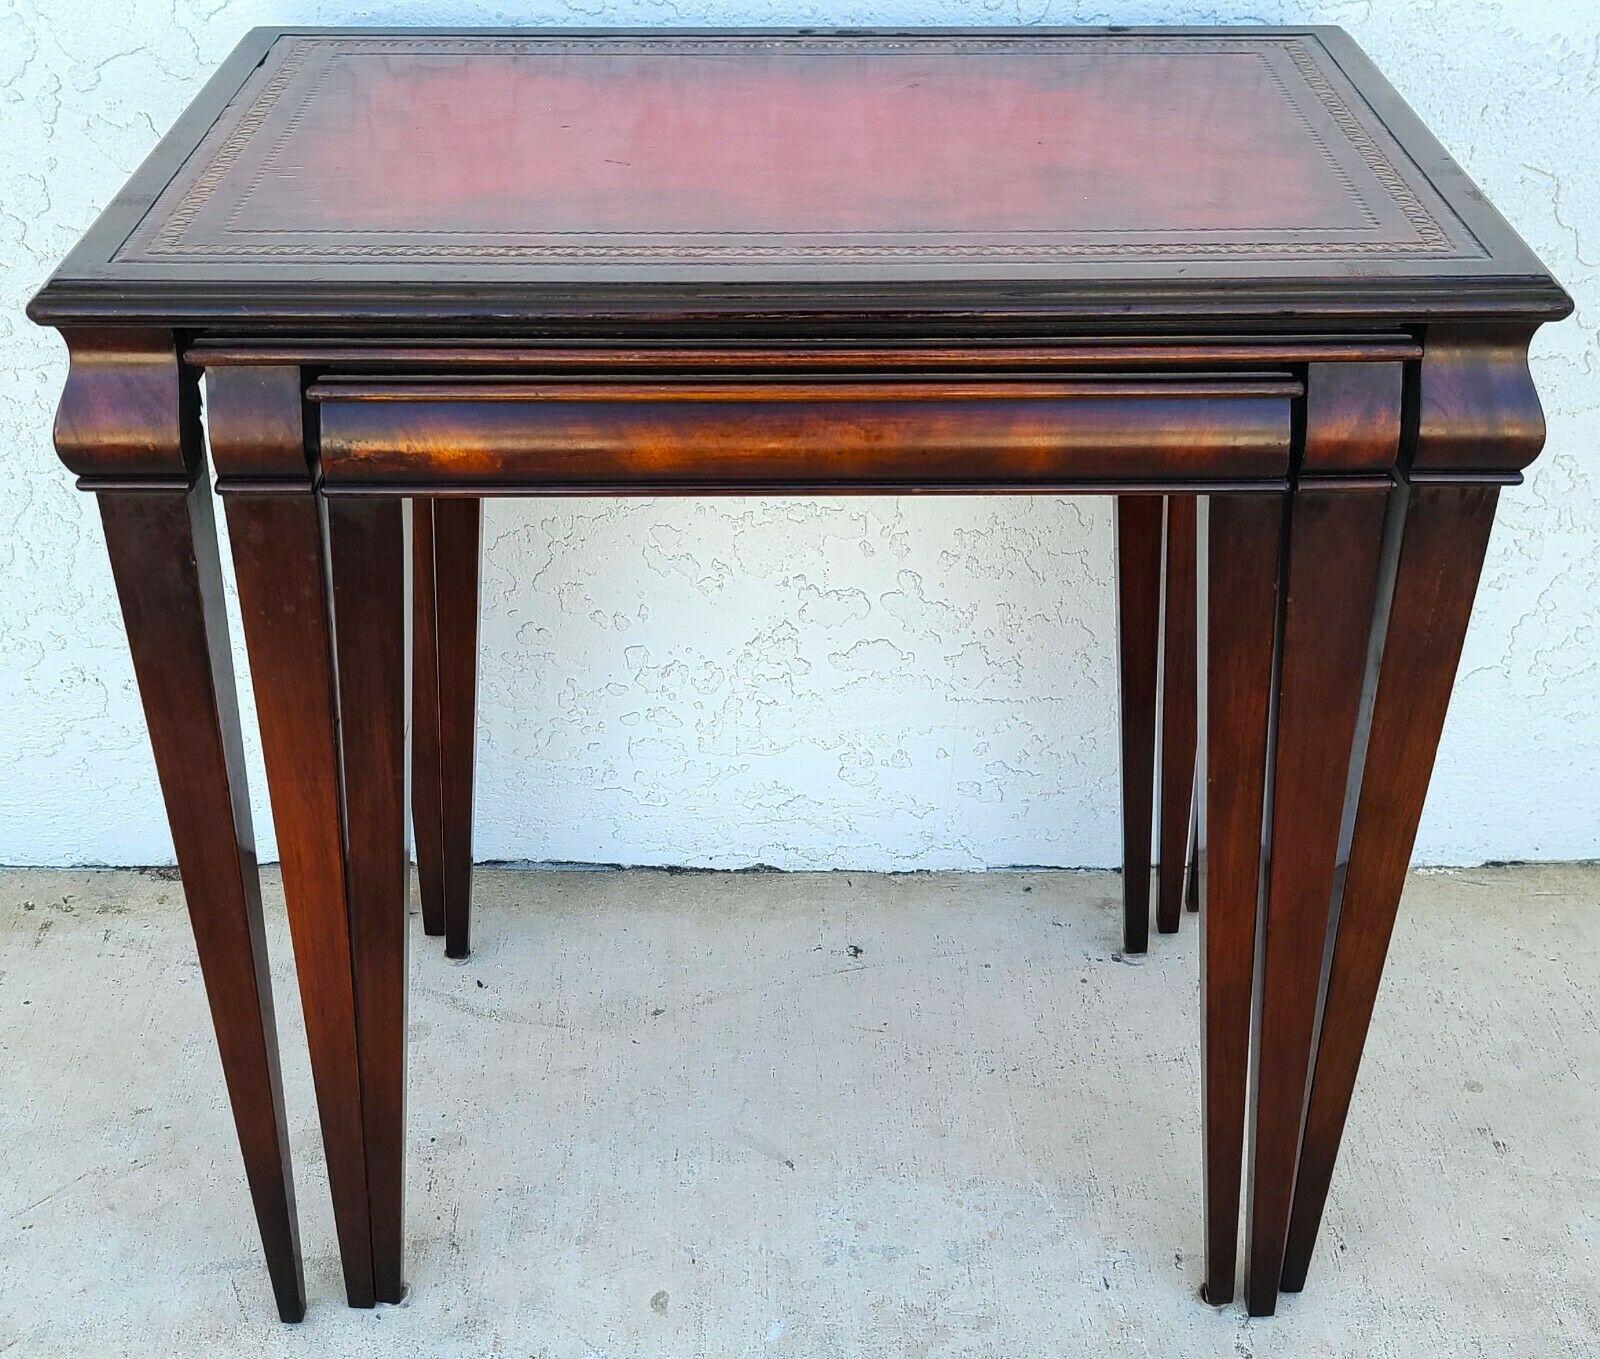 Offering one of our recent palm beach estate fine furniture acquisitions of a
Set of 3 mid century 1950s tooled red leather mahogany nesting tables 
They are interlocking so when they are together, you only have to lift the large on to move them